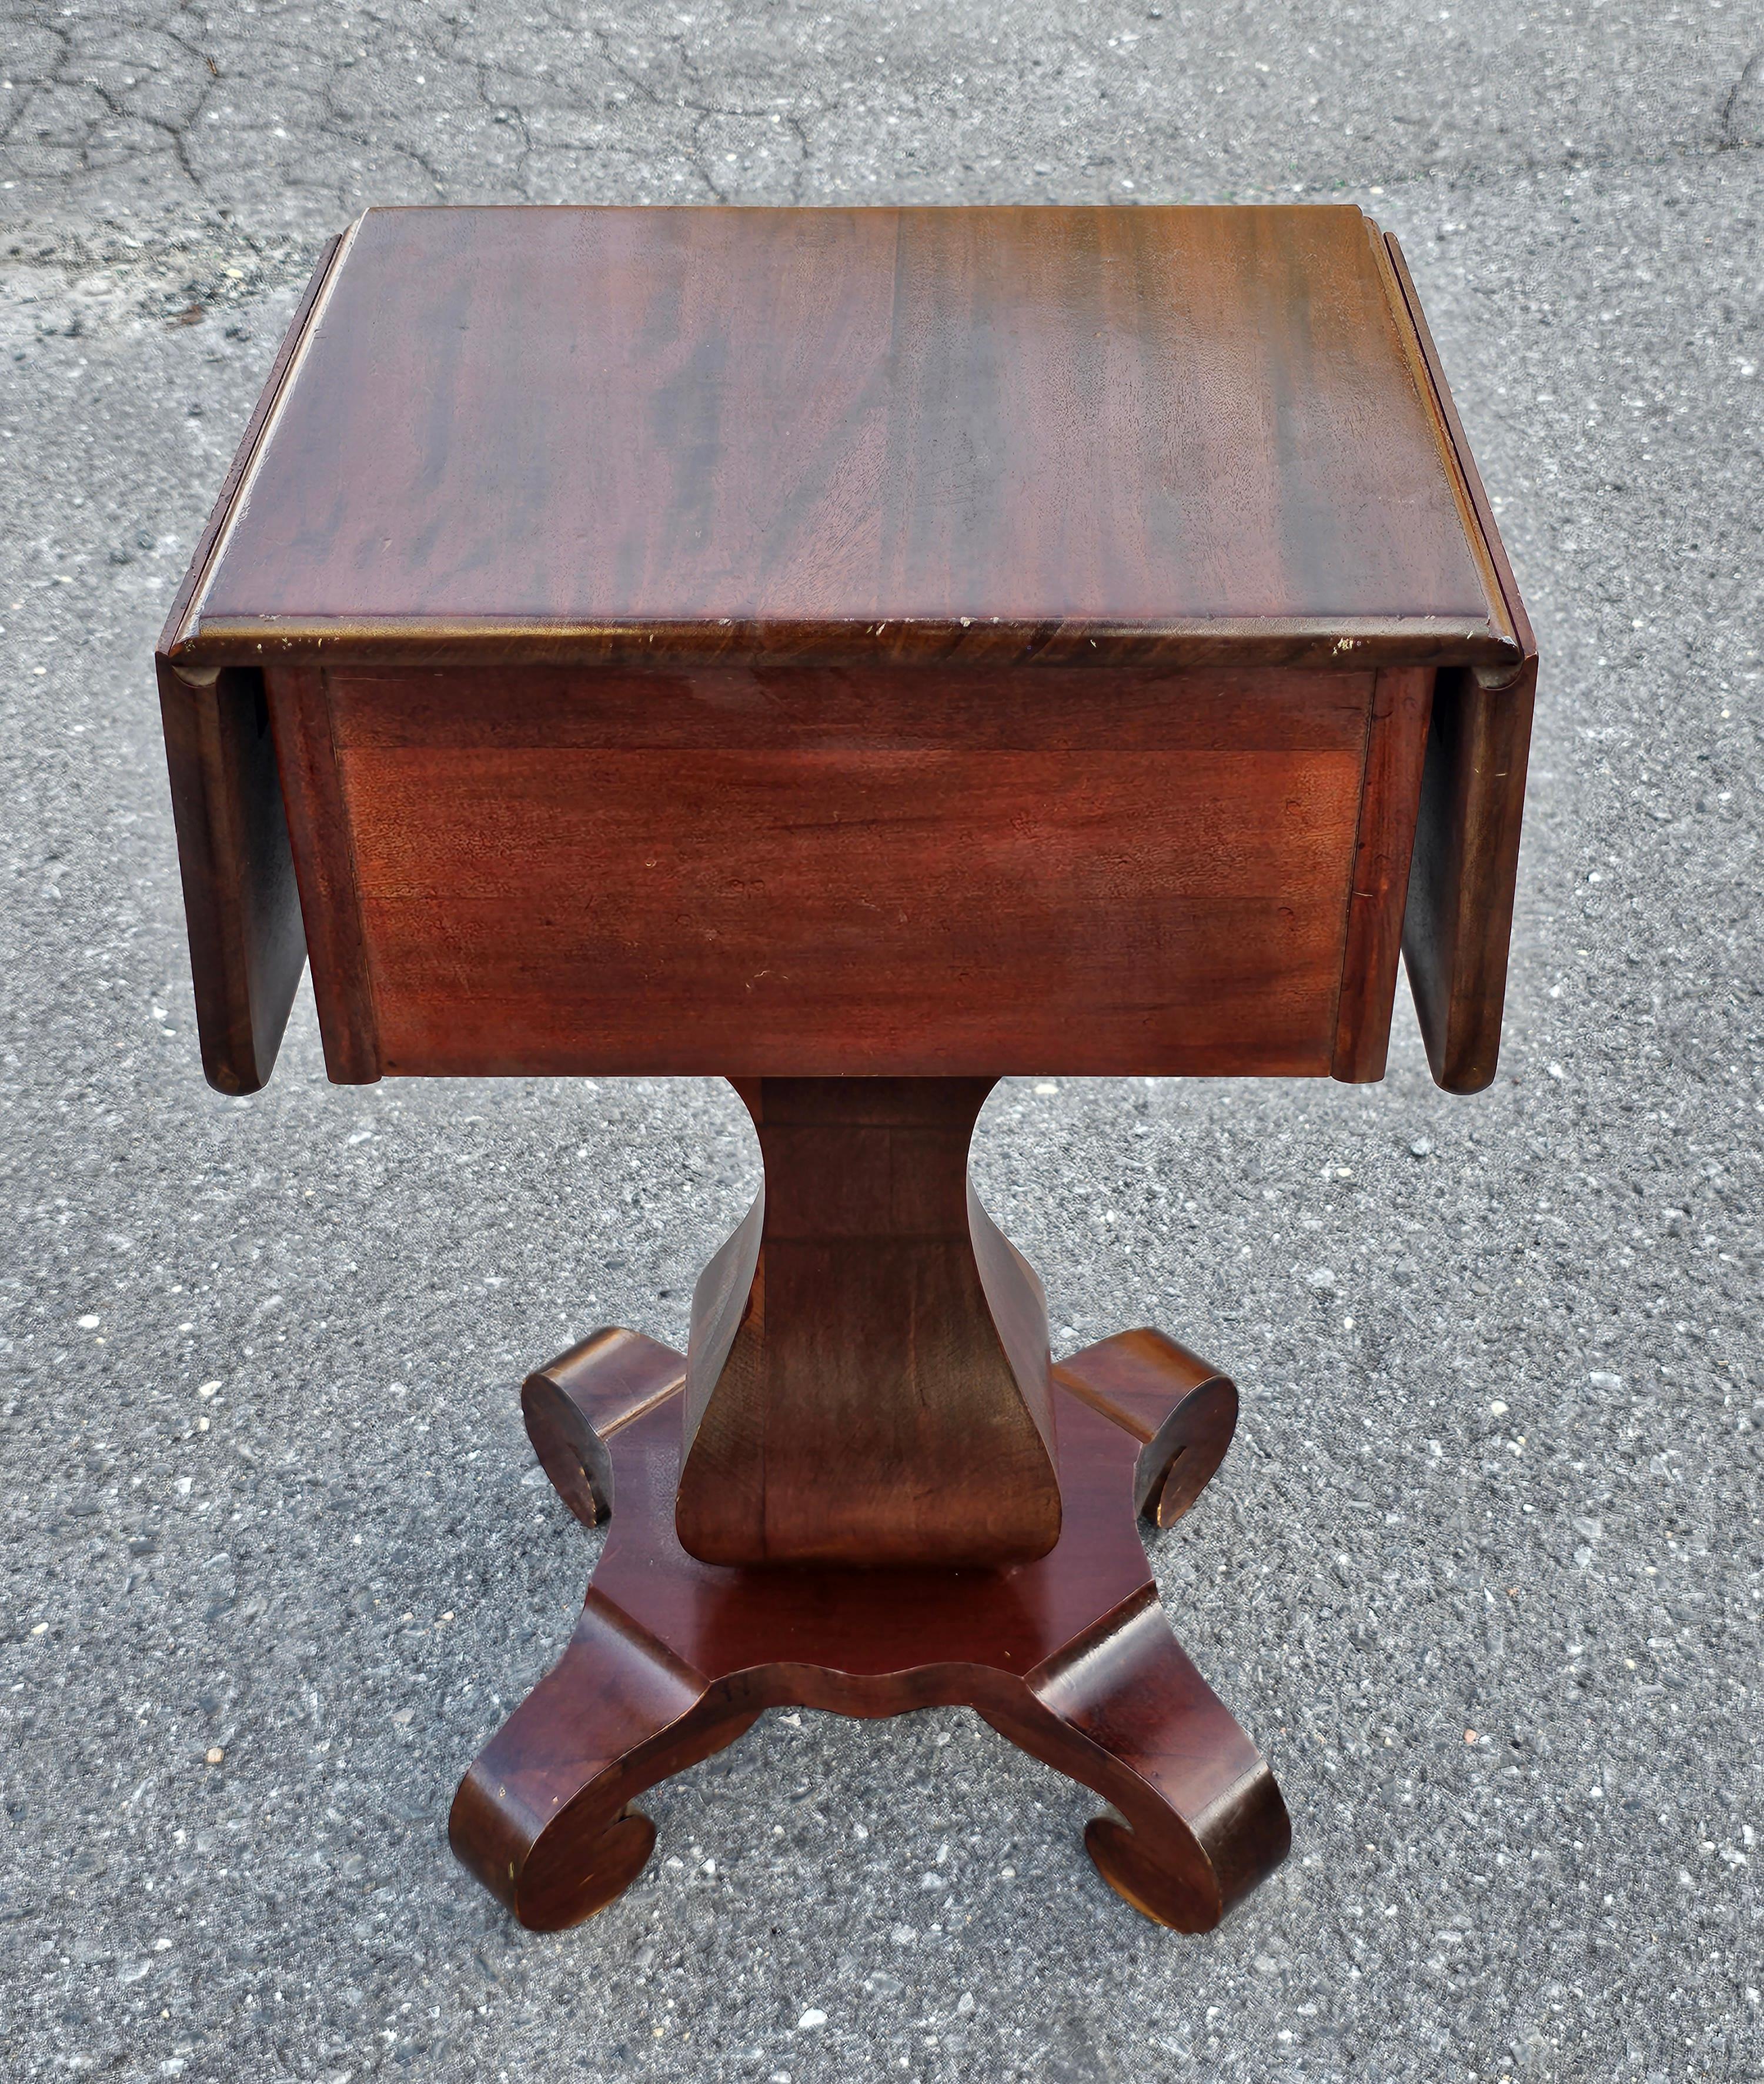 Varnished Early 20th Century American Empire Mahogany Drop Leaf Side Table By Imperial  For Sale